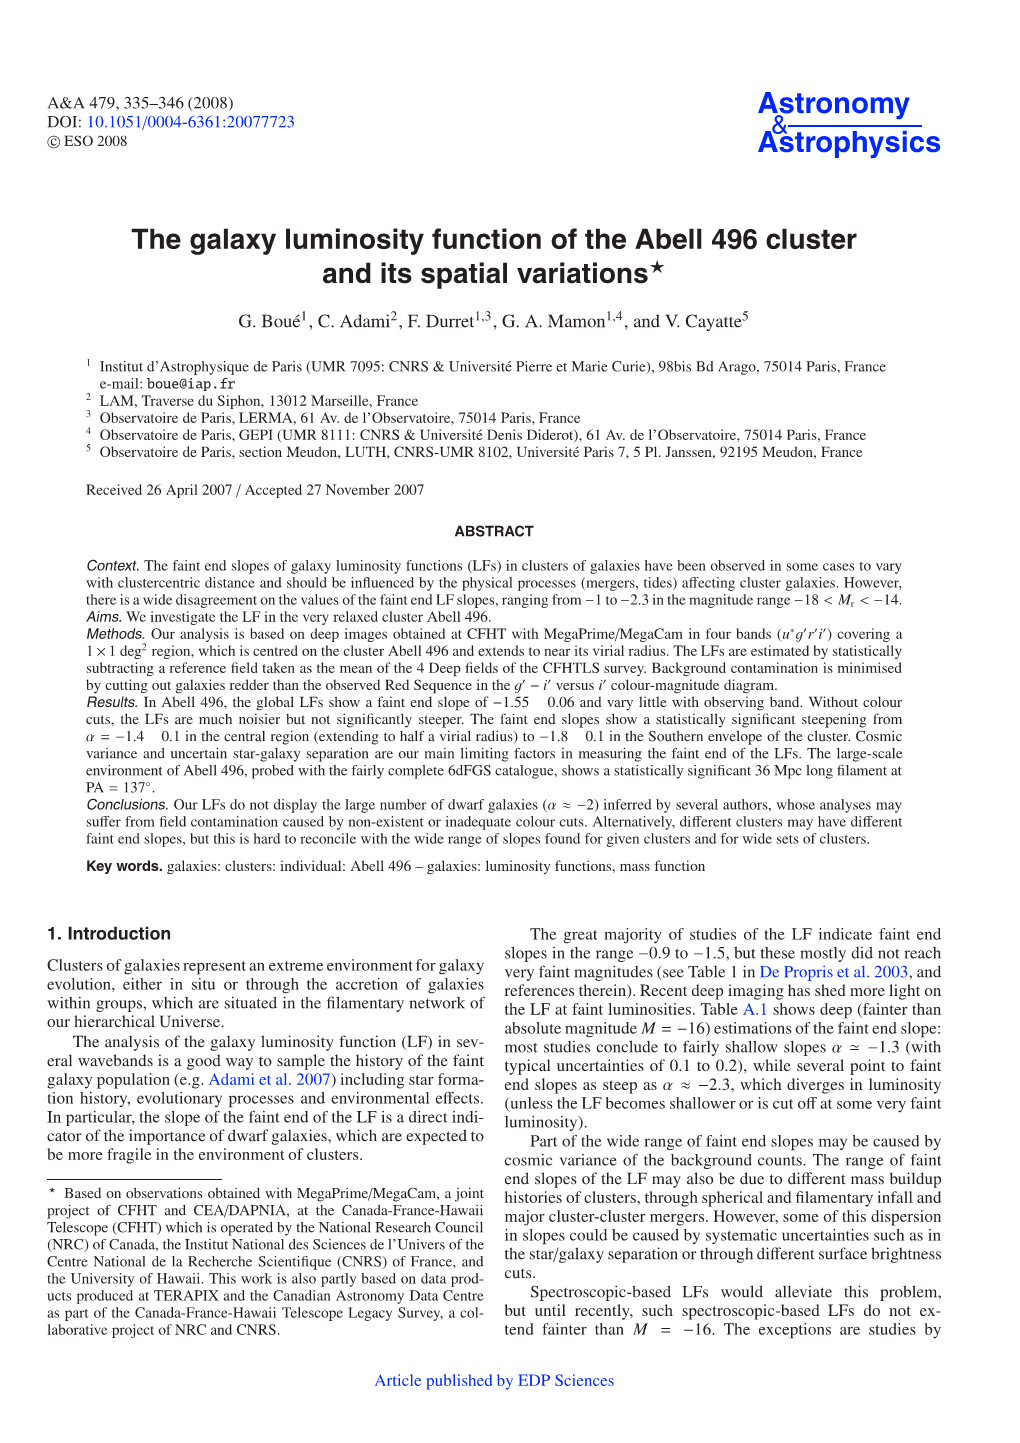 The Galaxy Luminosity Function of the Abell 496 Cluster and Its Spatial Variations